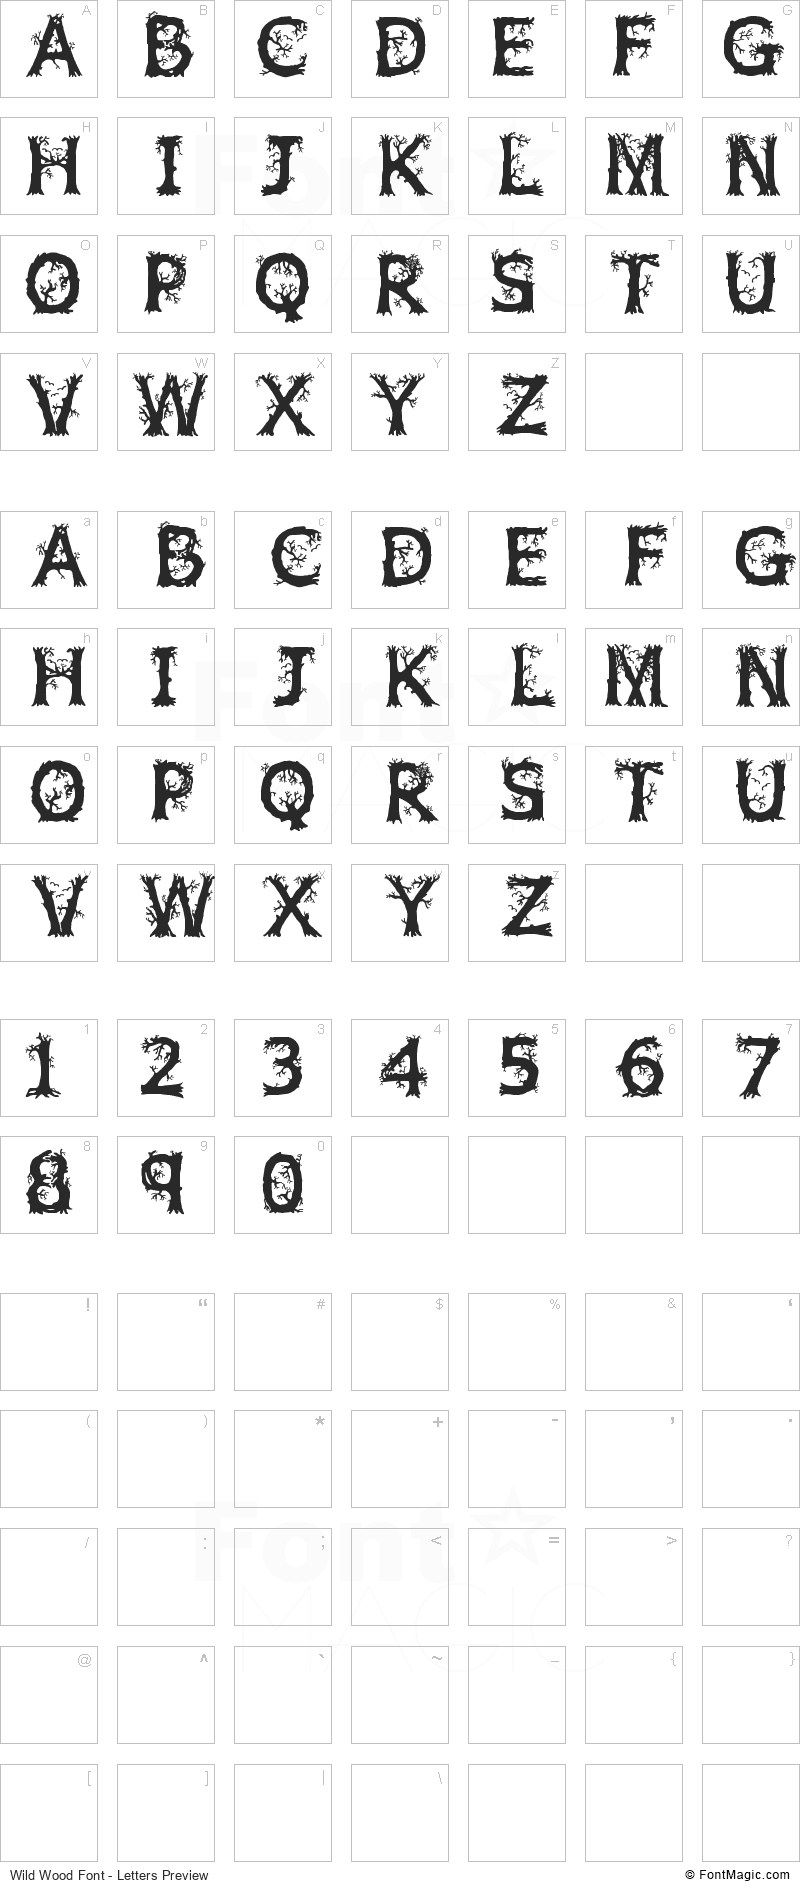 Wild Wood Font - All Latters Preview Chart